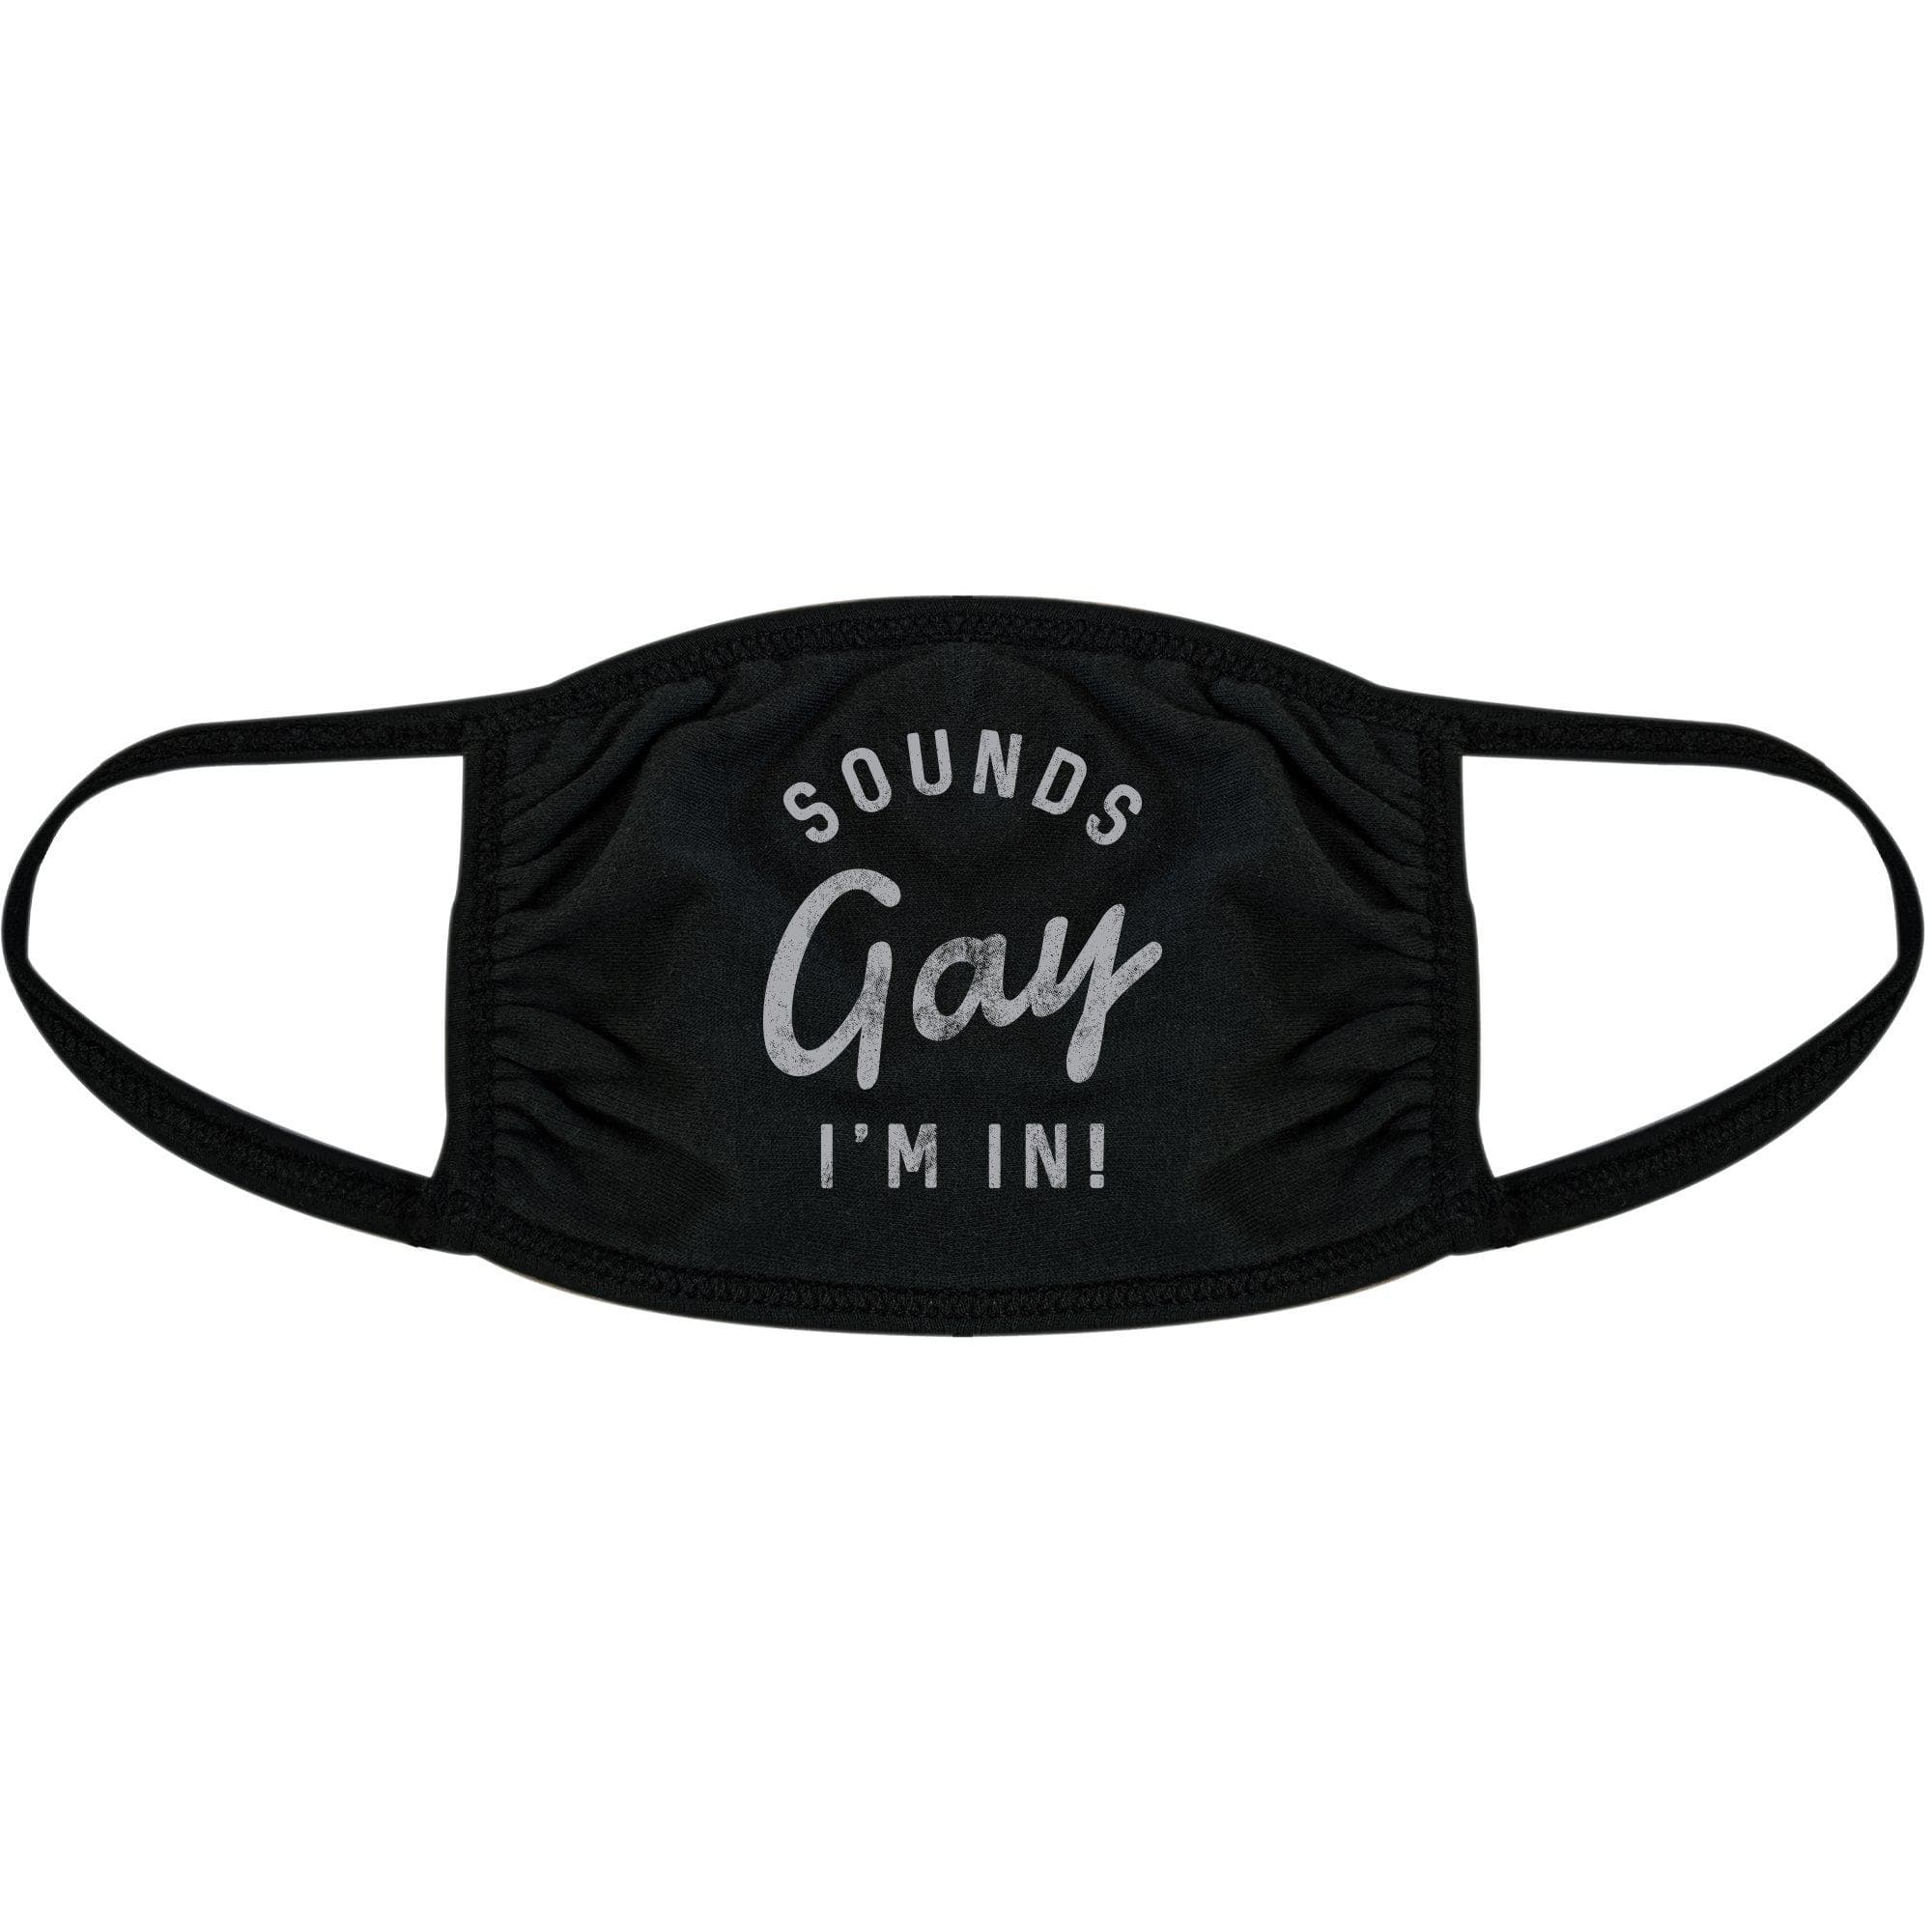 Sounds Gay I'm In Face Mask Mask - Crazy Dog T-Shirts